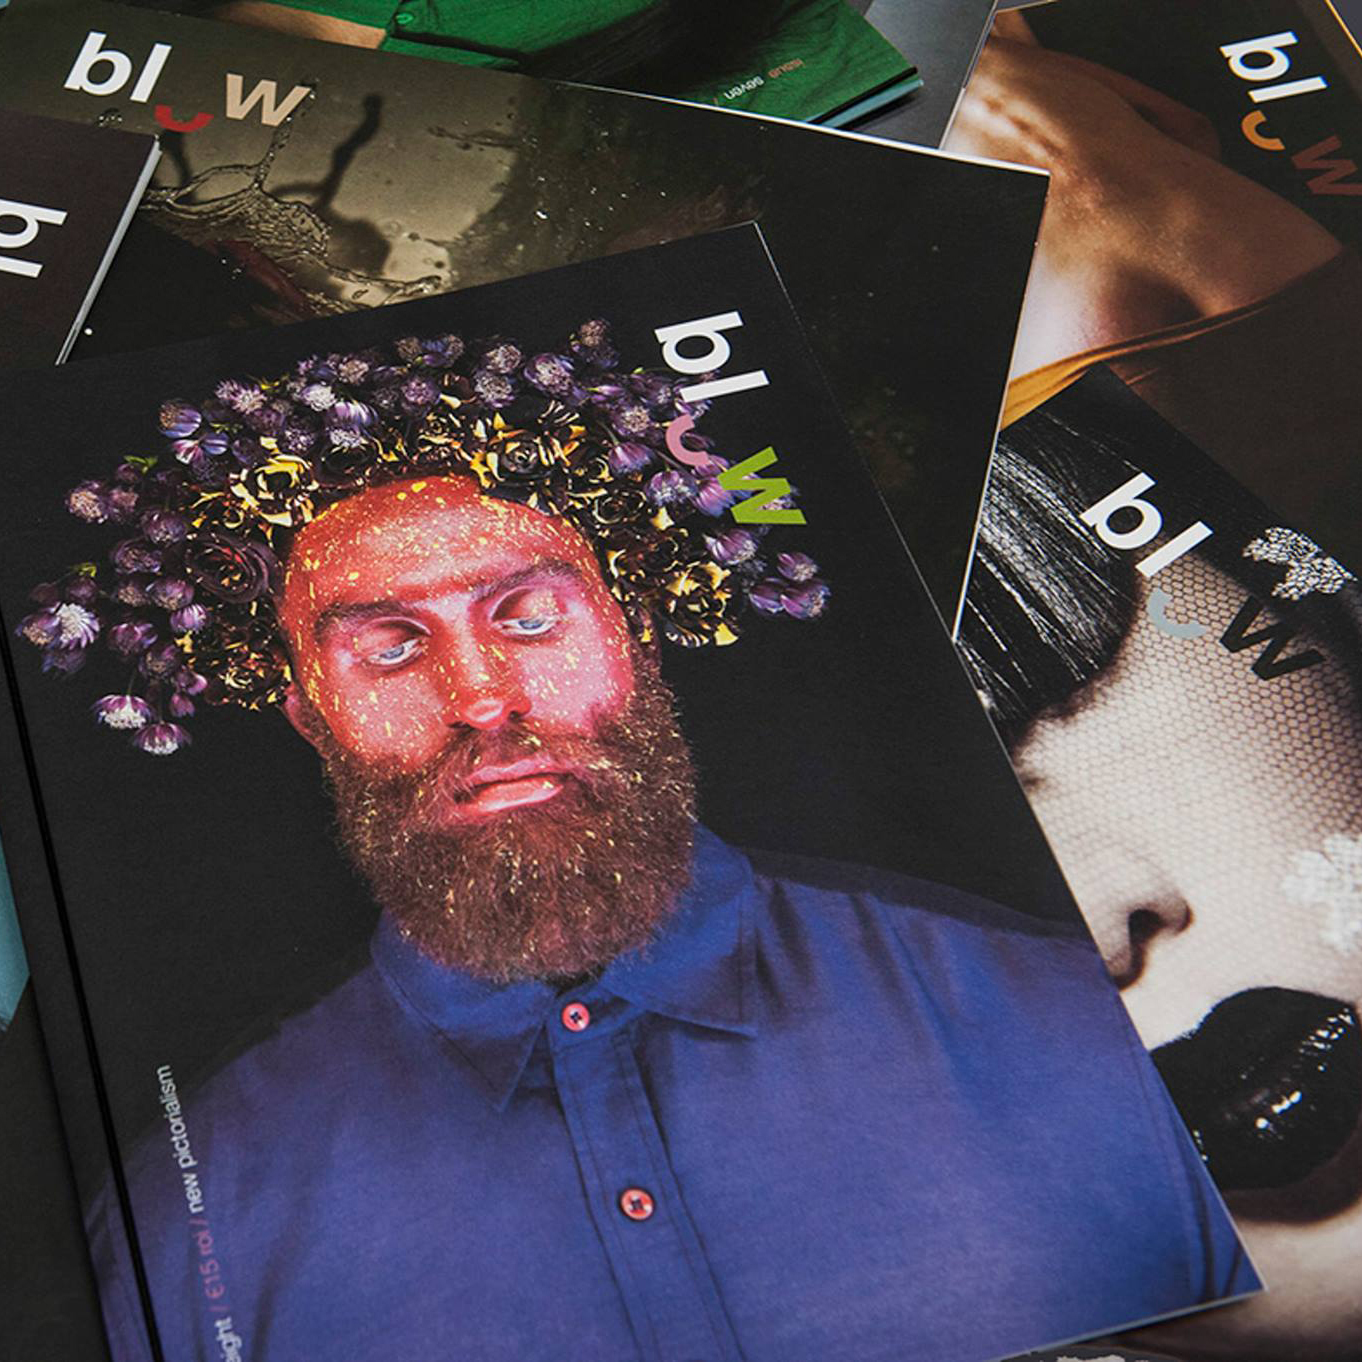 issues of blow photo magazine